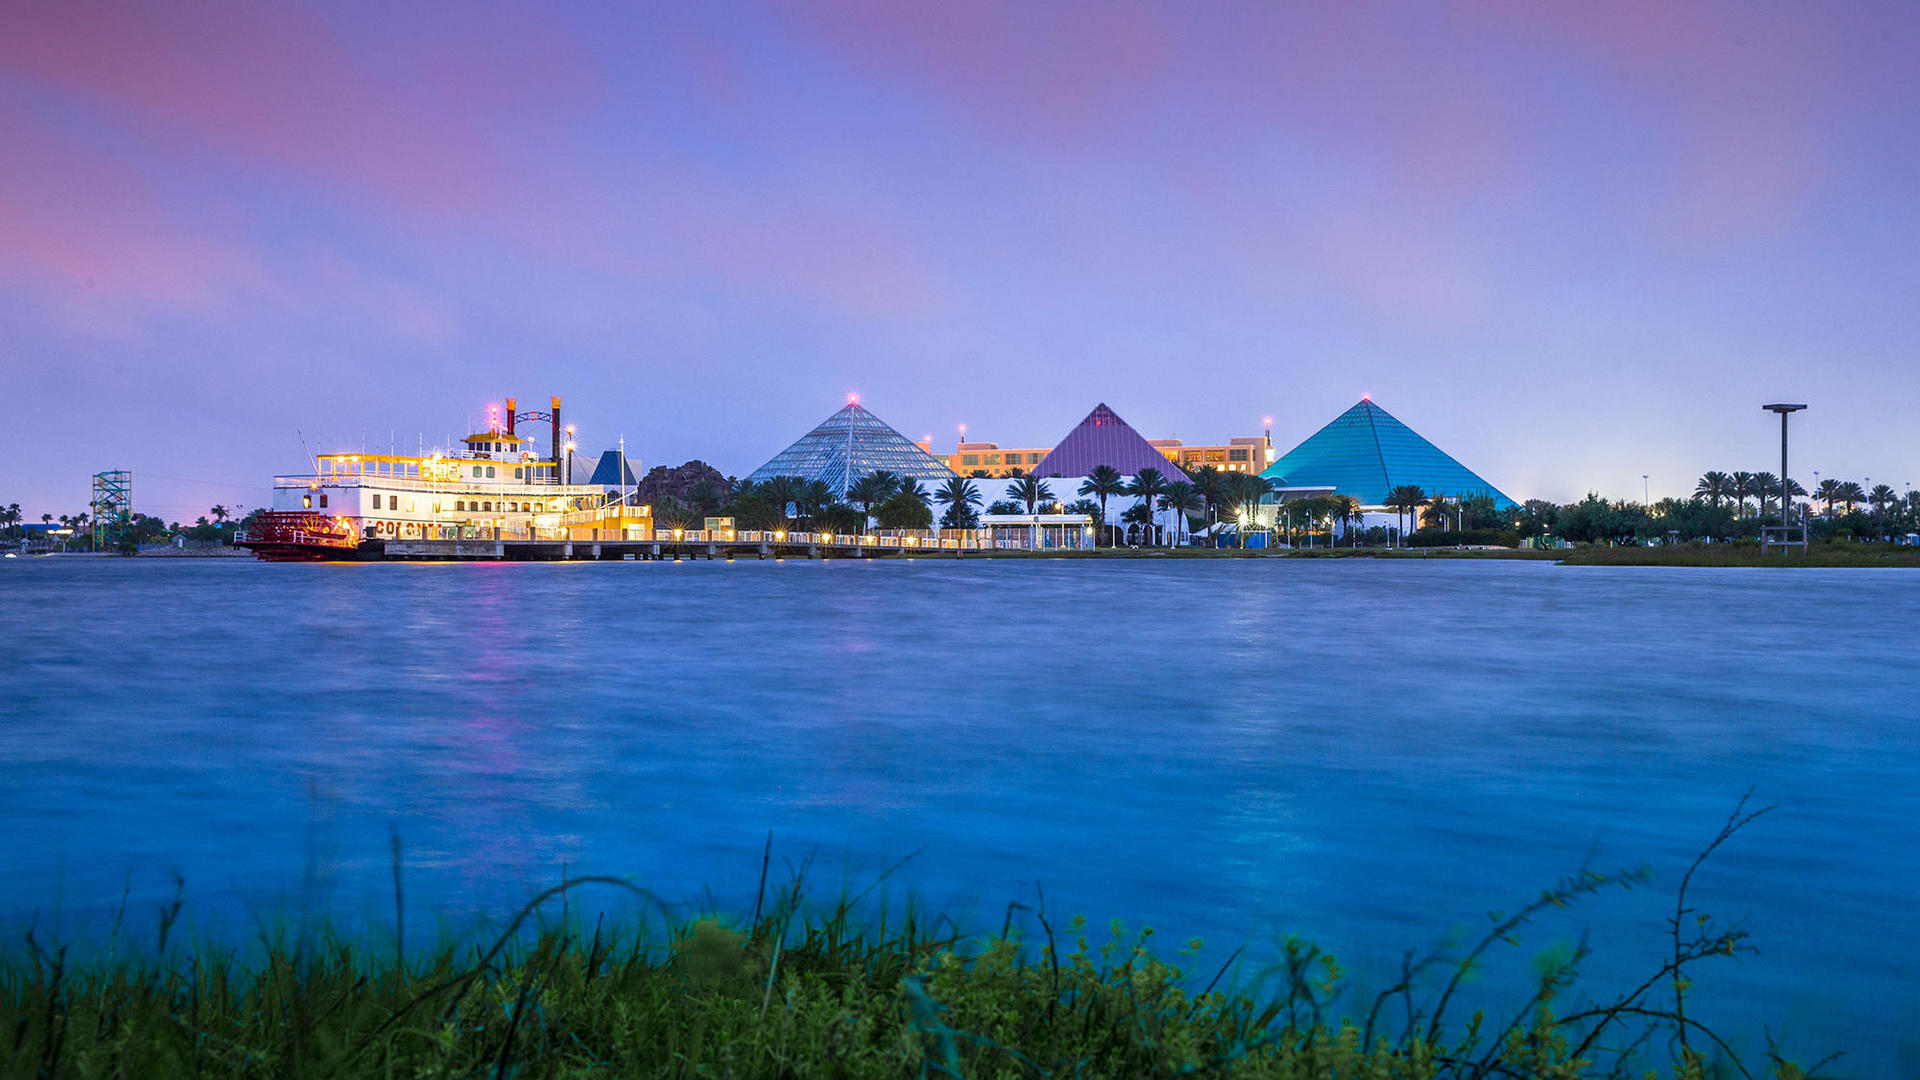 View of Pyramids From Across the Water